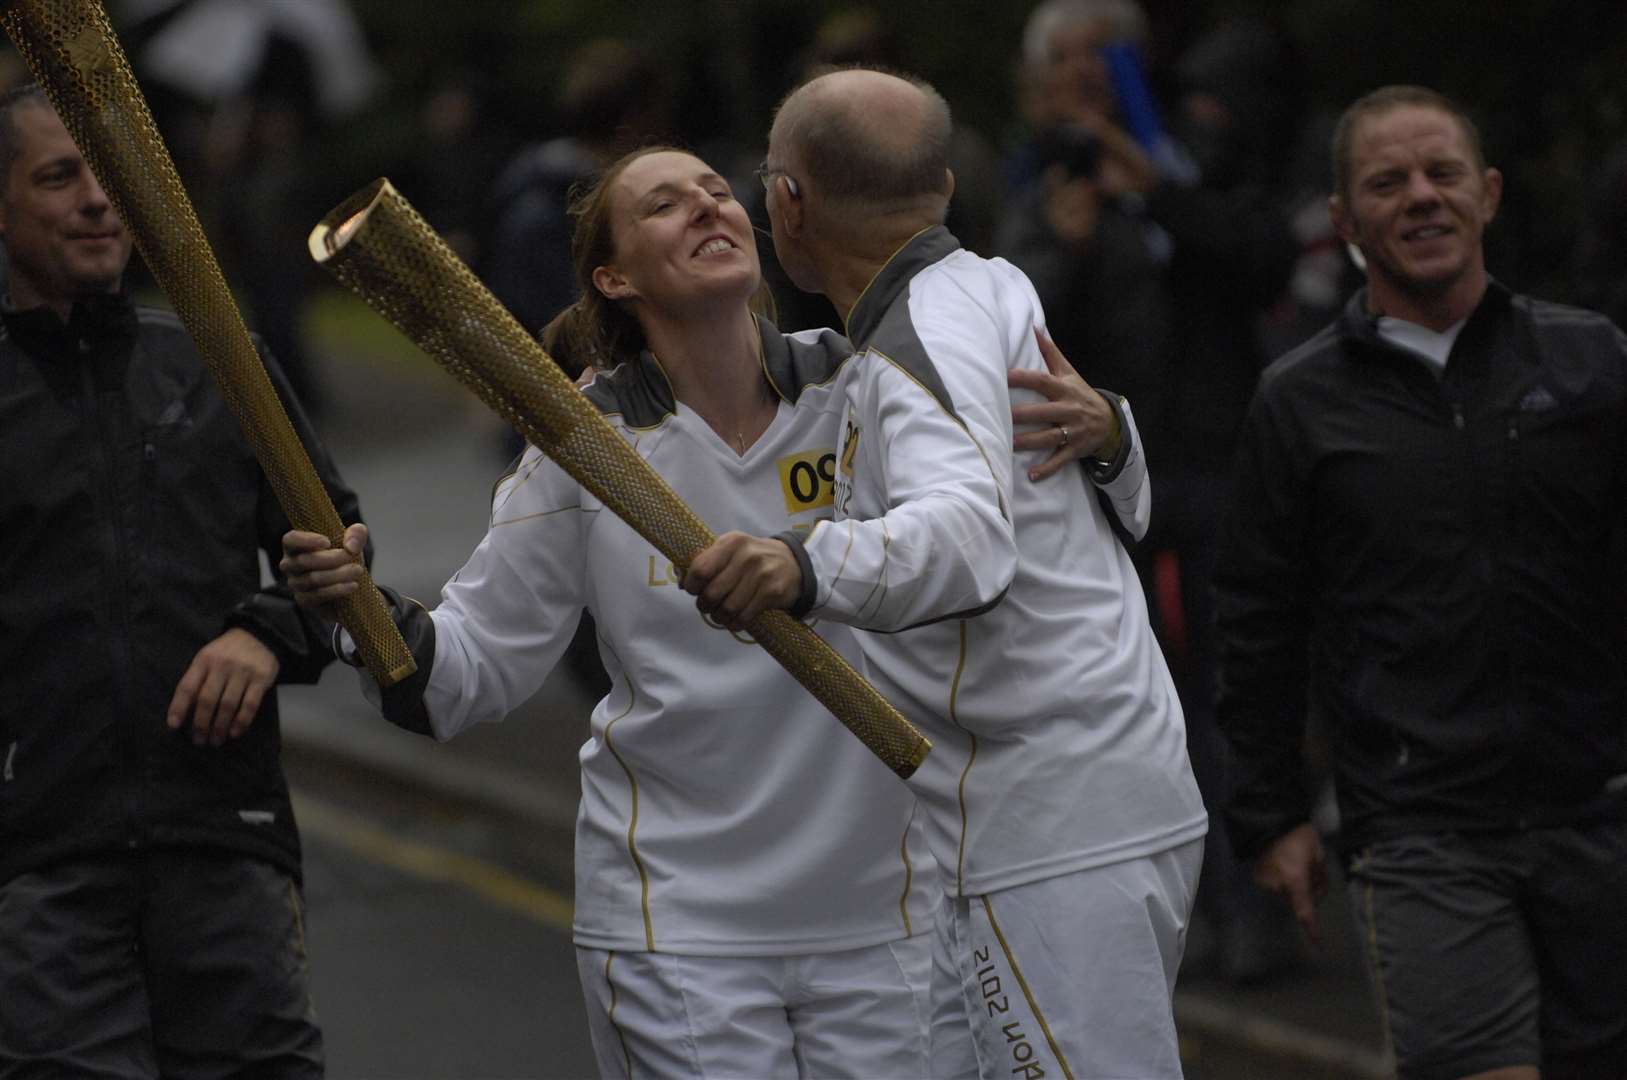 Cathy Graham and Wilfried Lemke exchange the flame and a kiss in Dover